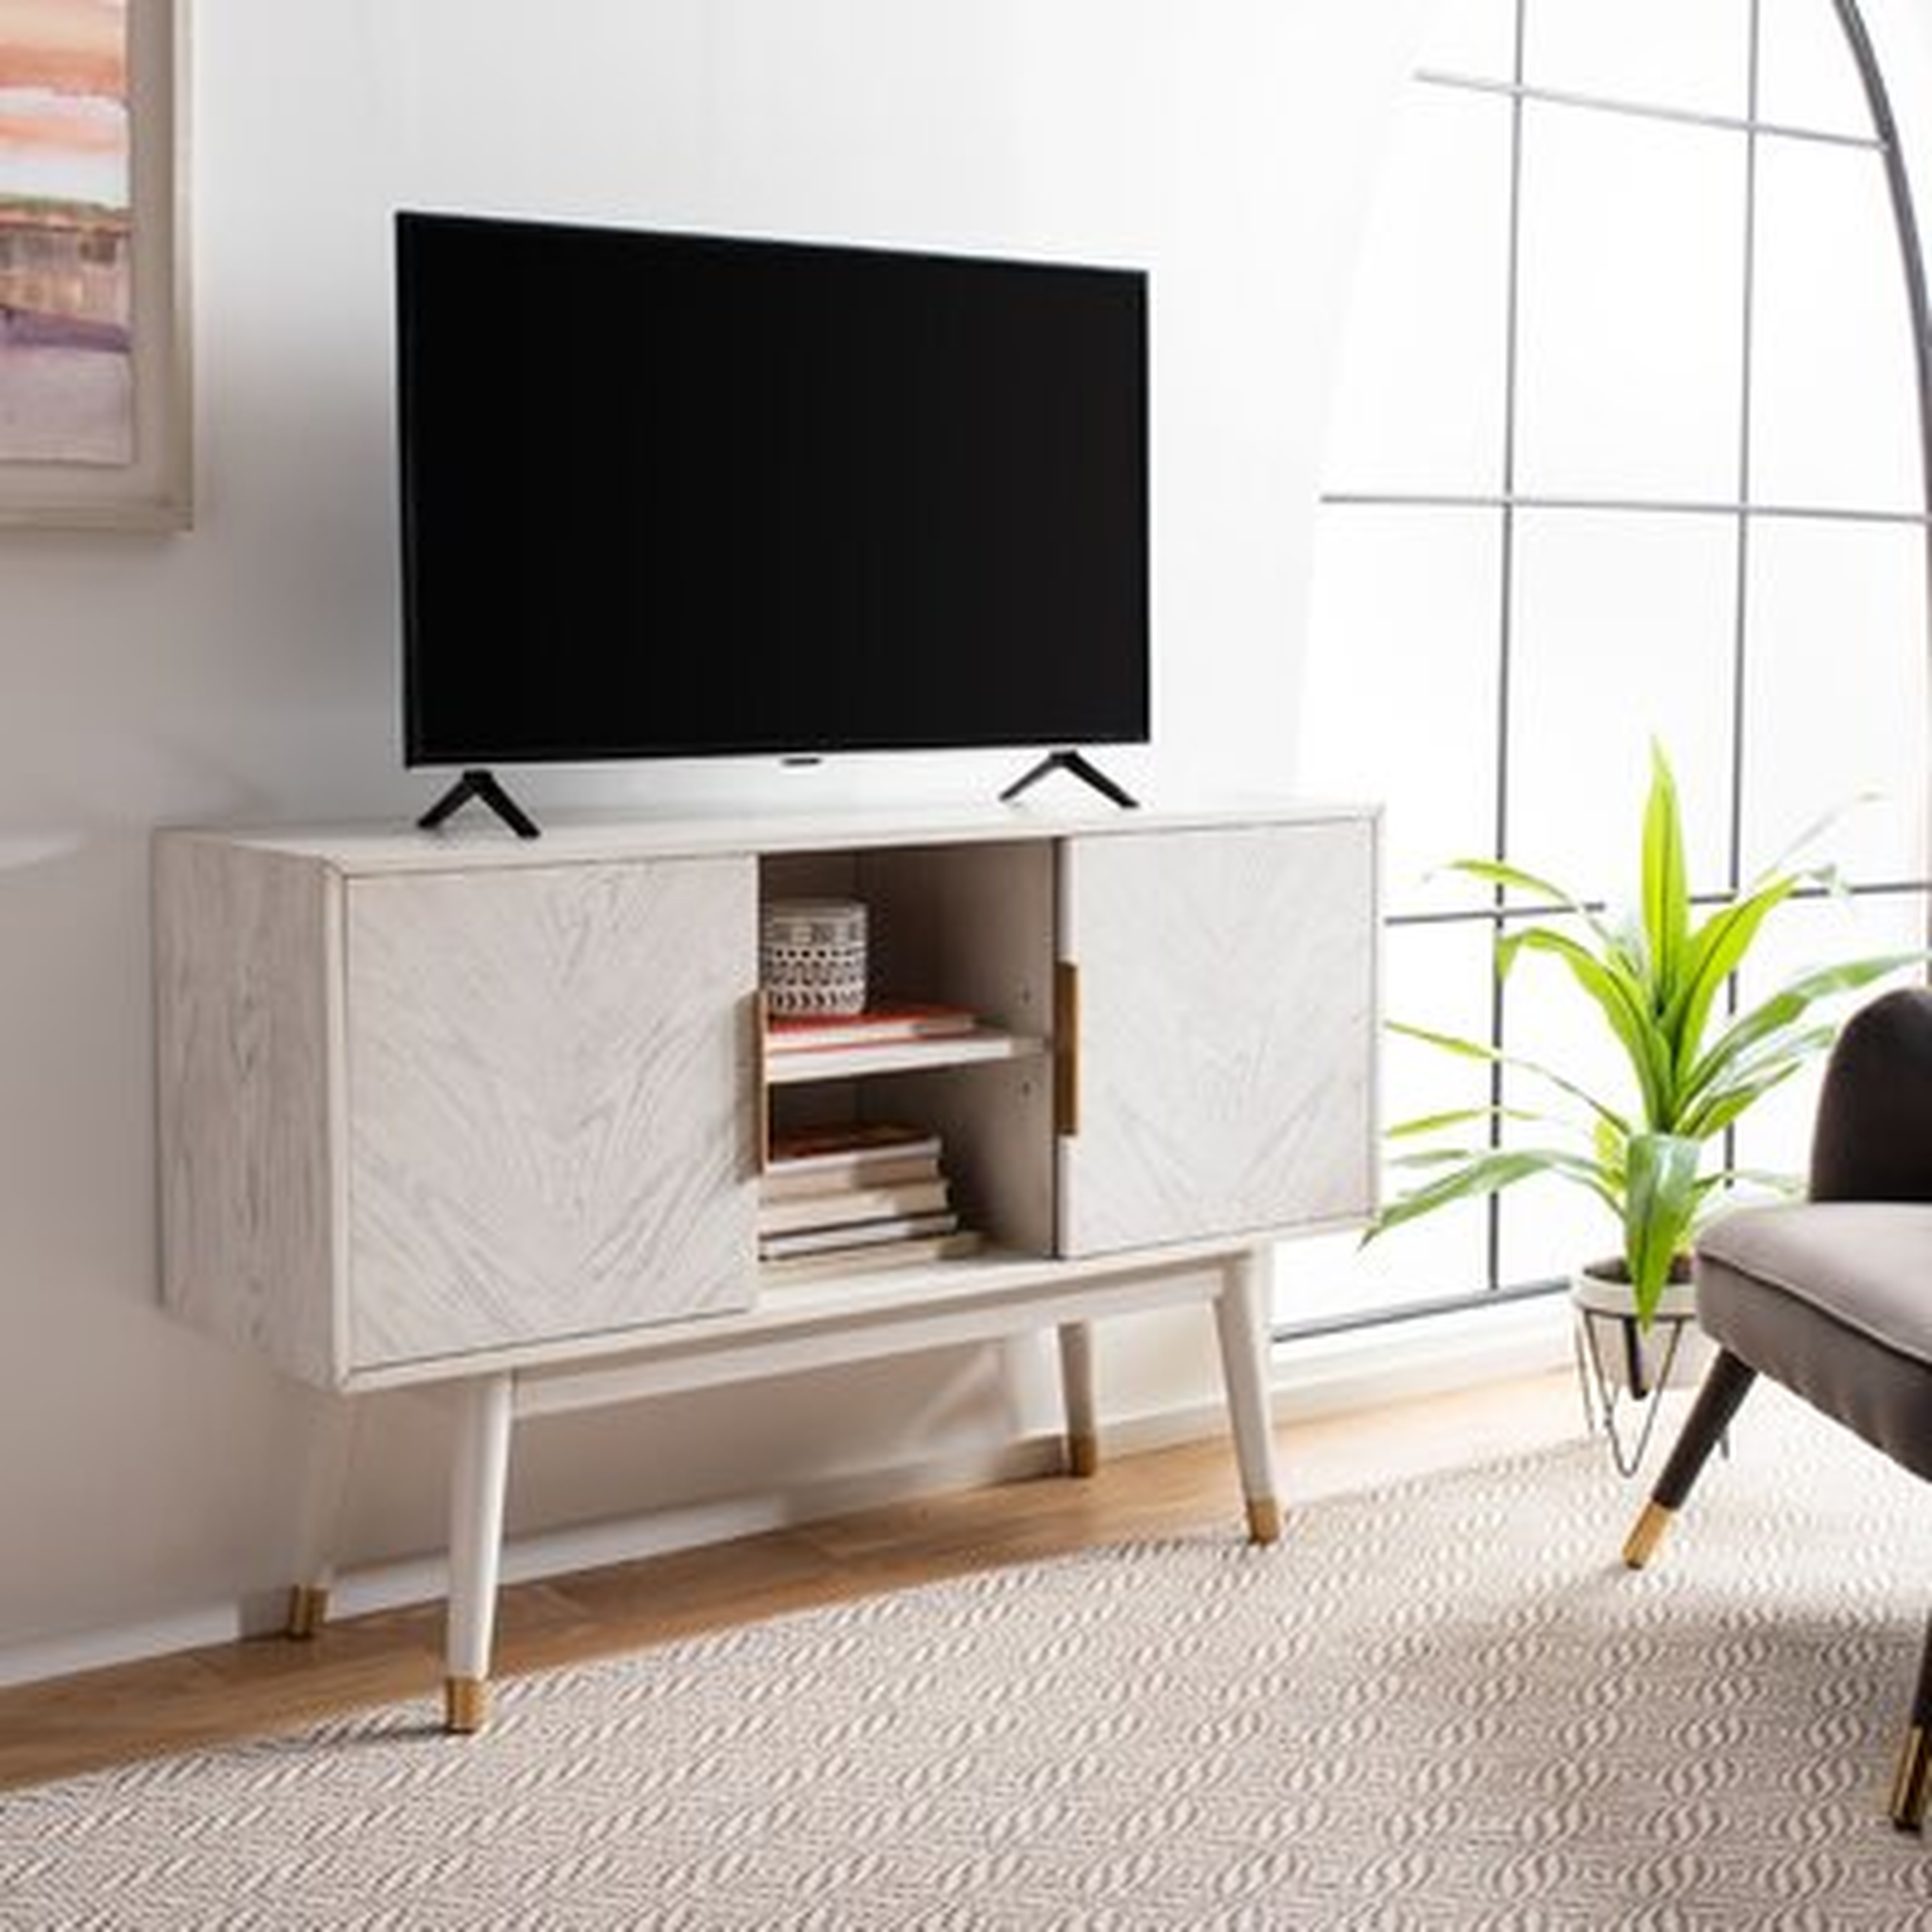 Folcroft TV Stand for TVs up to 60" - Wayfair